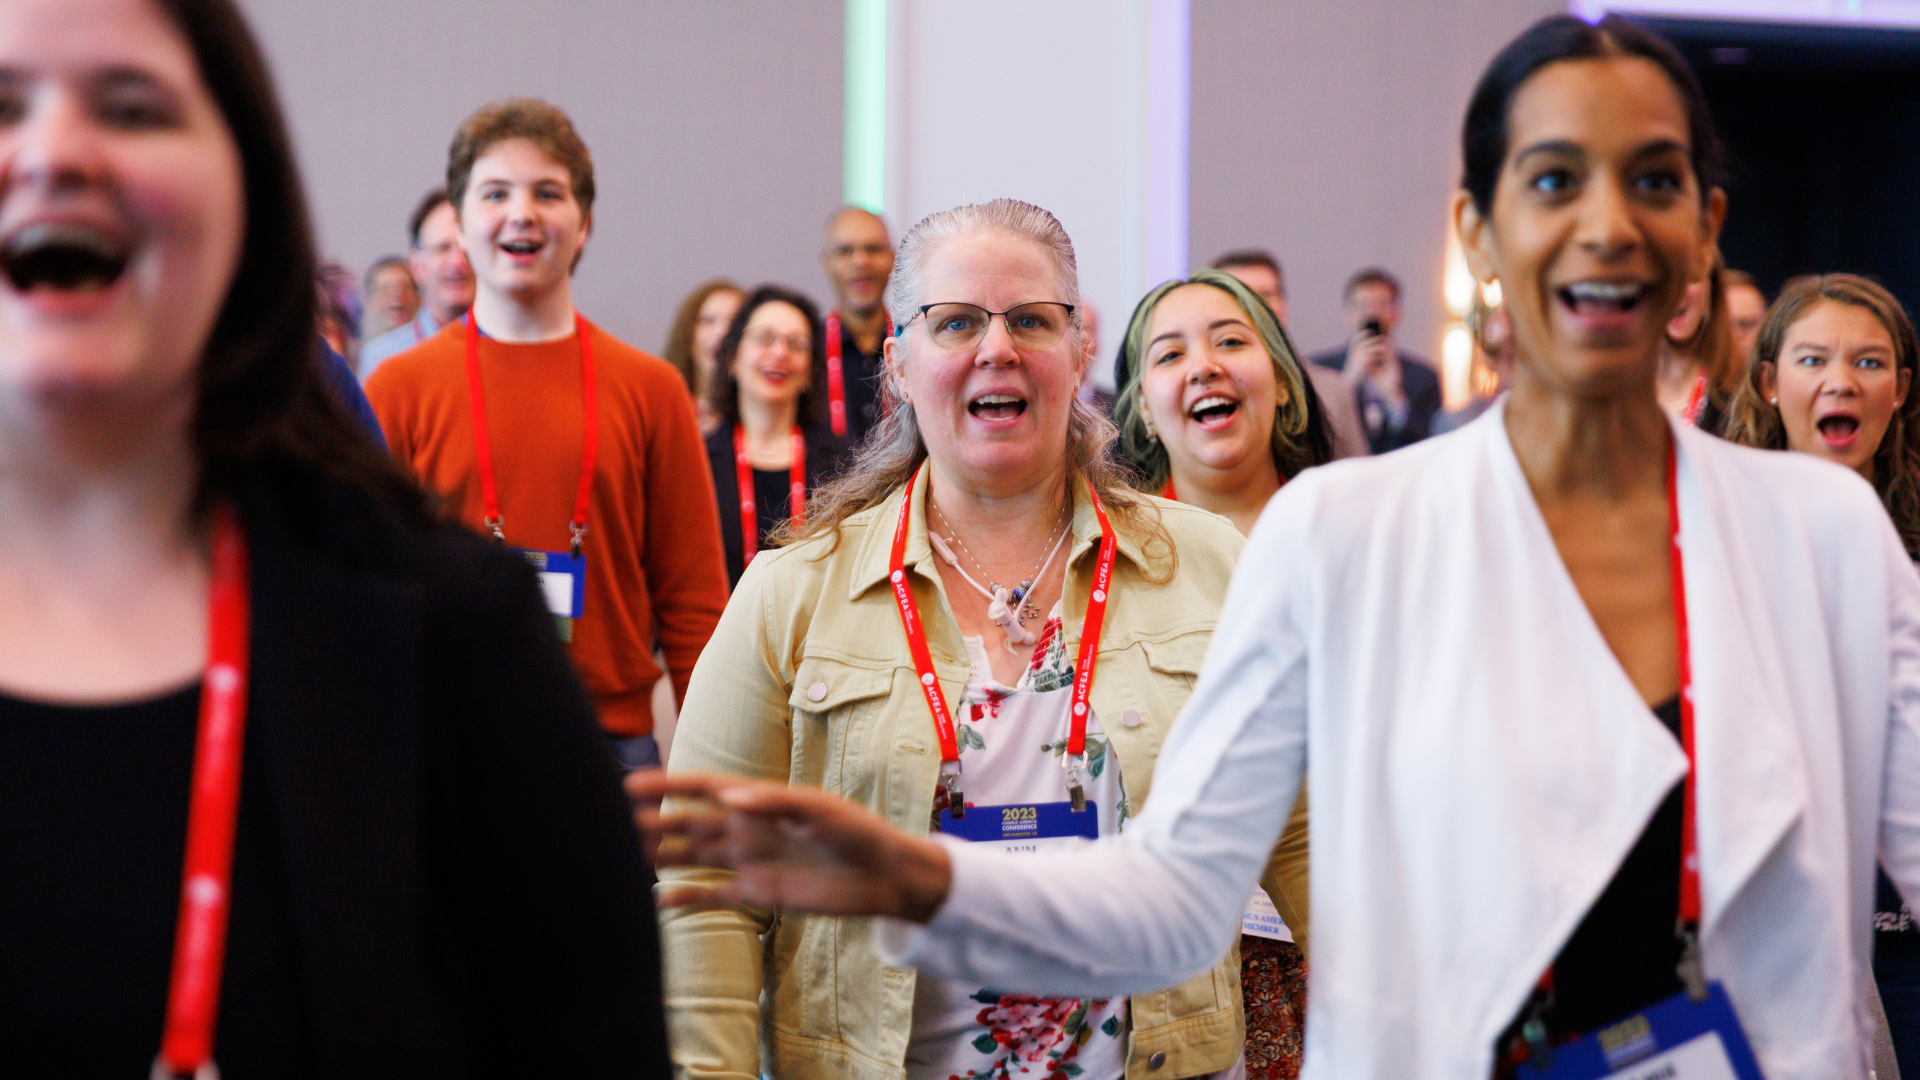 A room full of conference attendees wearing red lanyards and name tags with their mouths open as they face the camera and sing